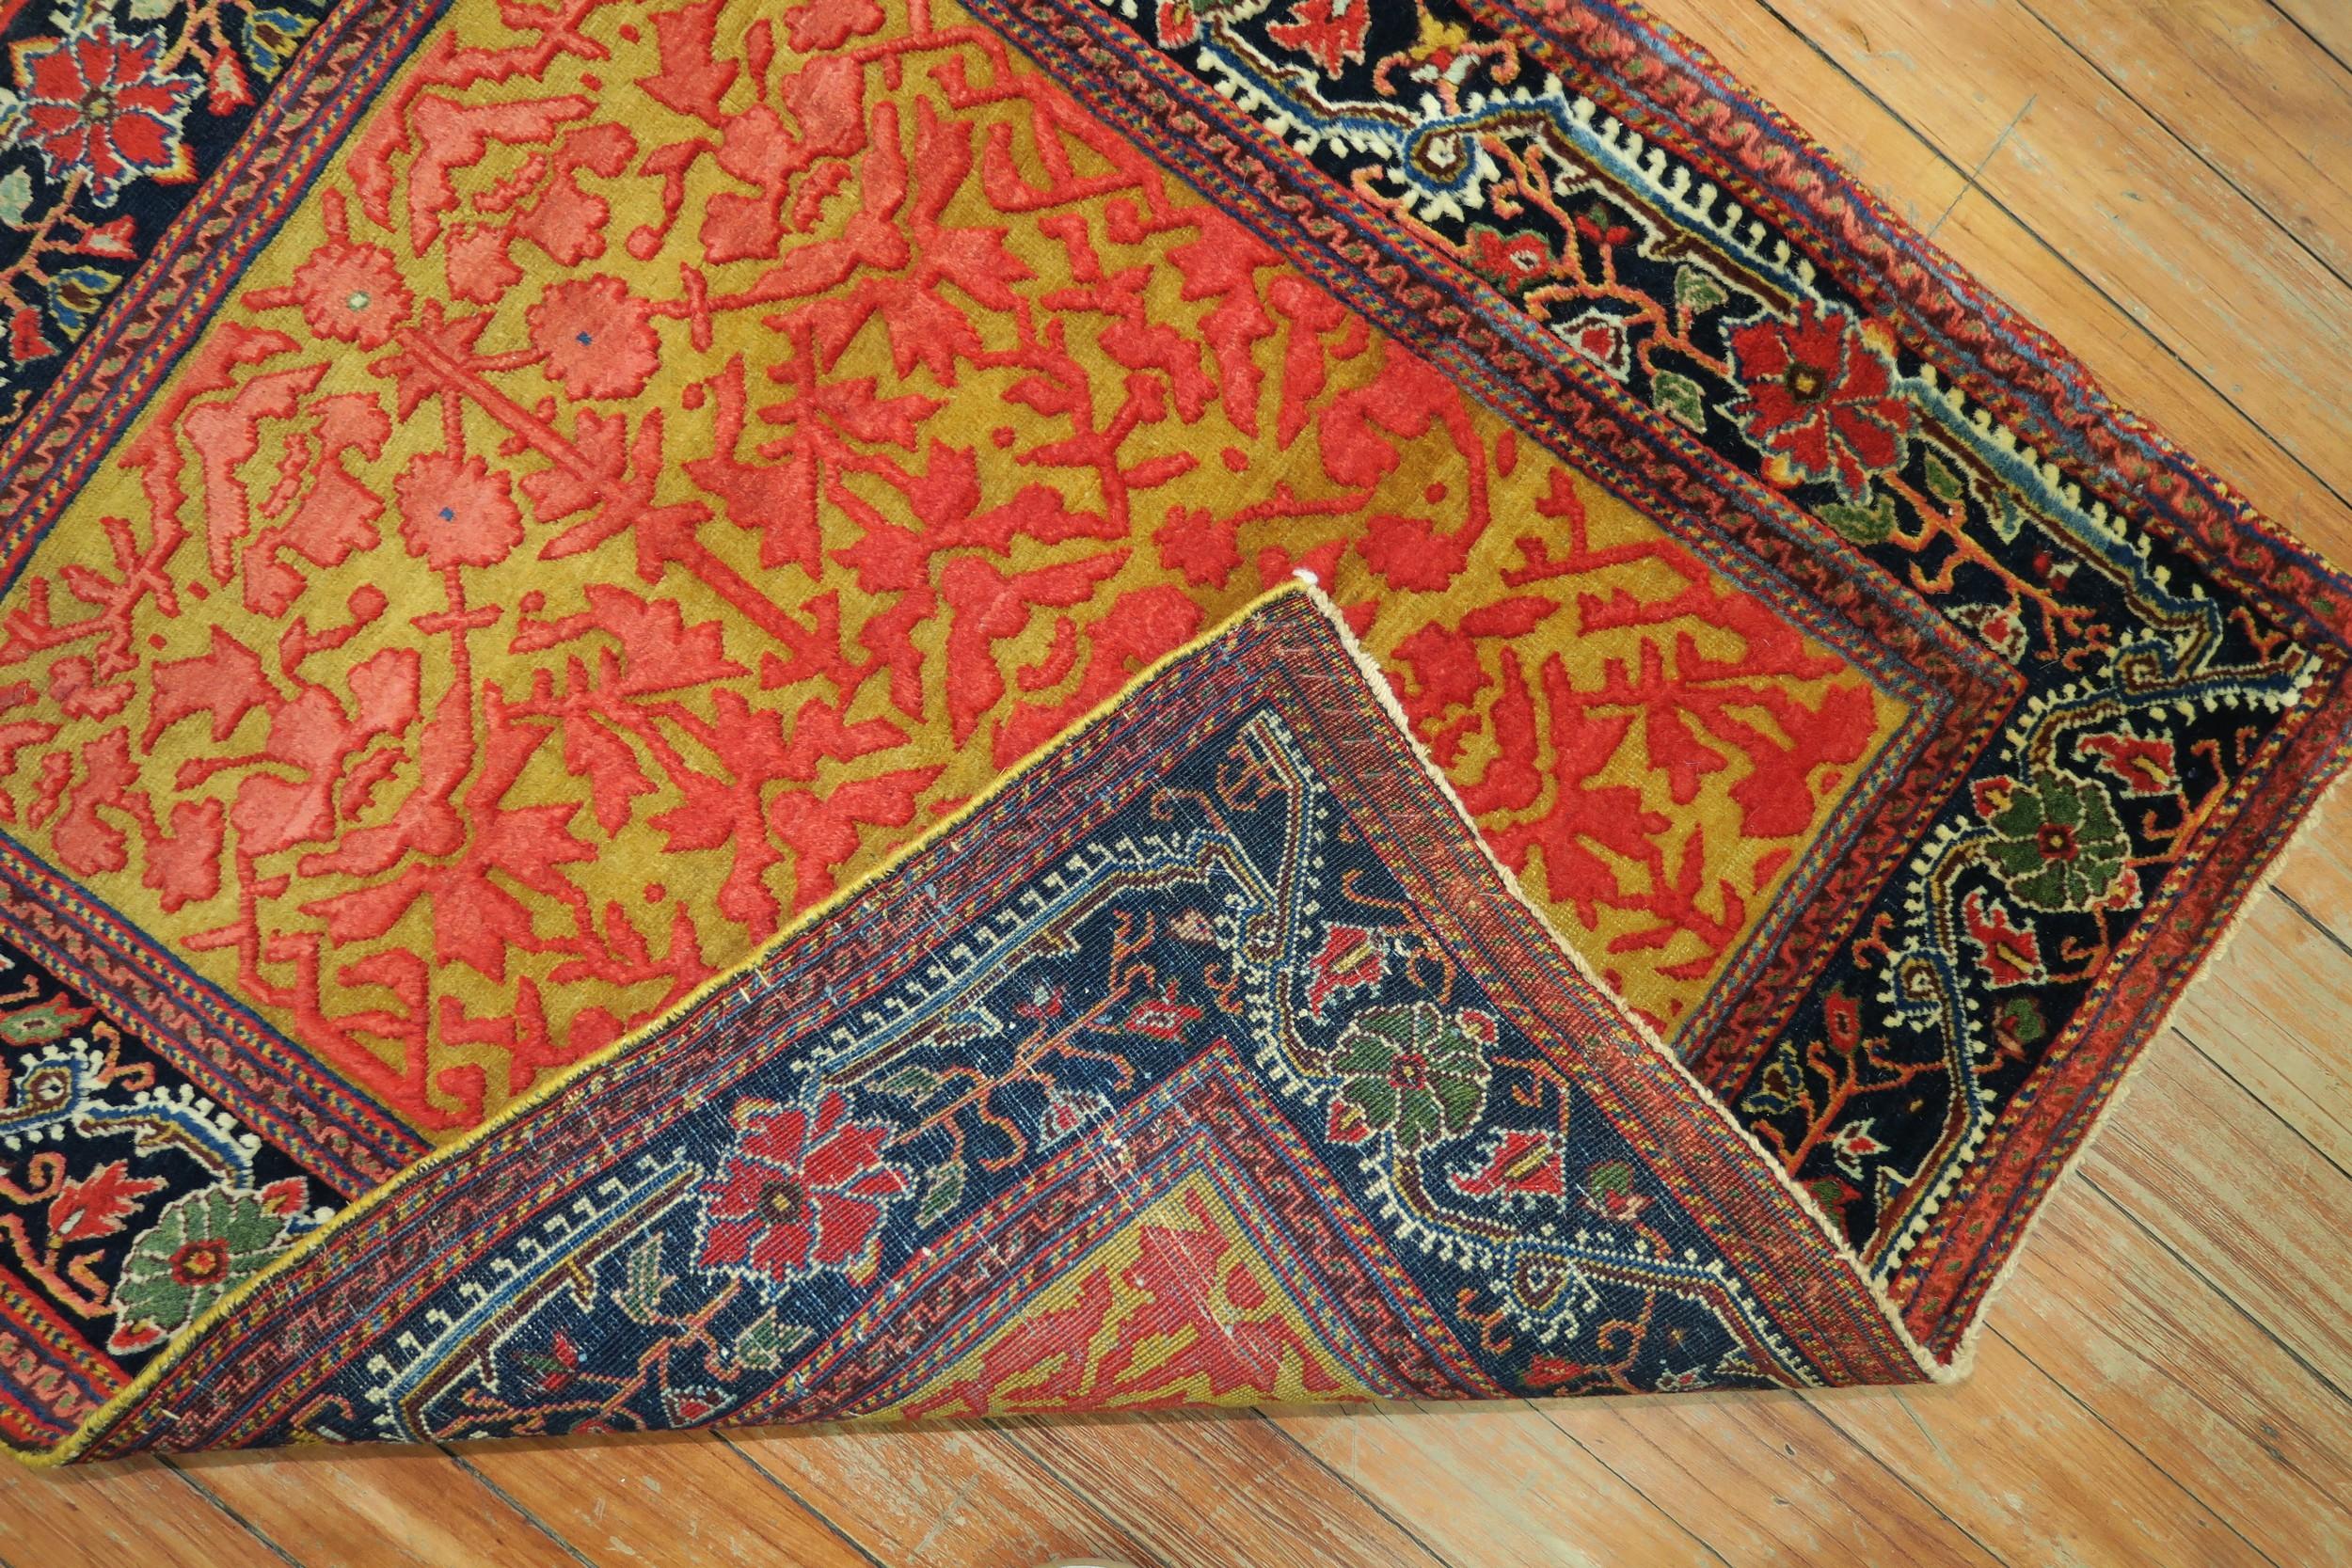 Jewel Tone Early 20th Century Superfine Quality Antique Persian Jozan Souf Mat In Excellent Condition For Sale In New York, NY